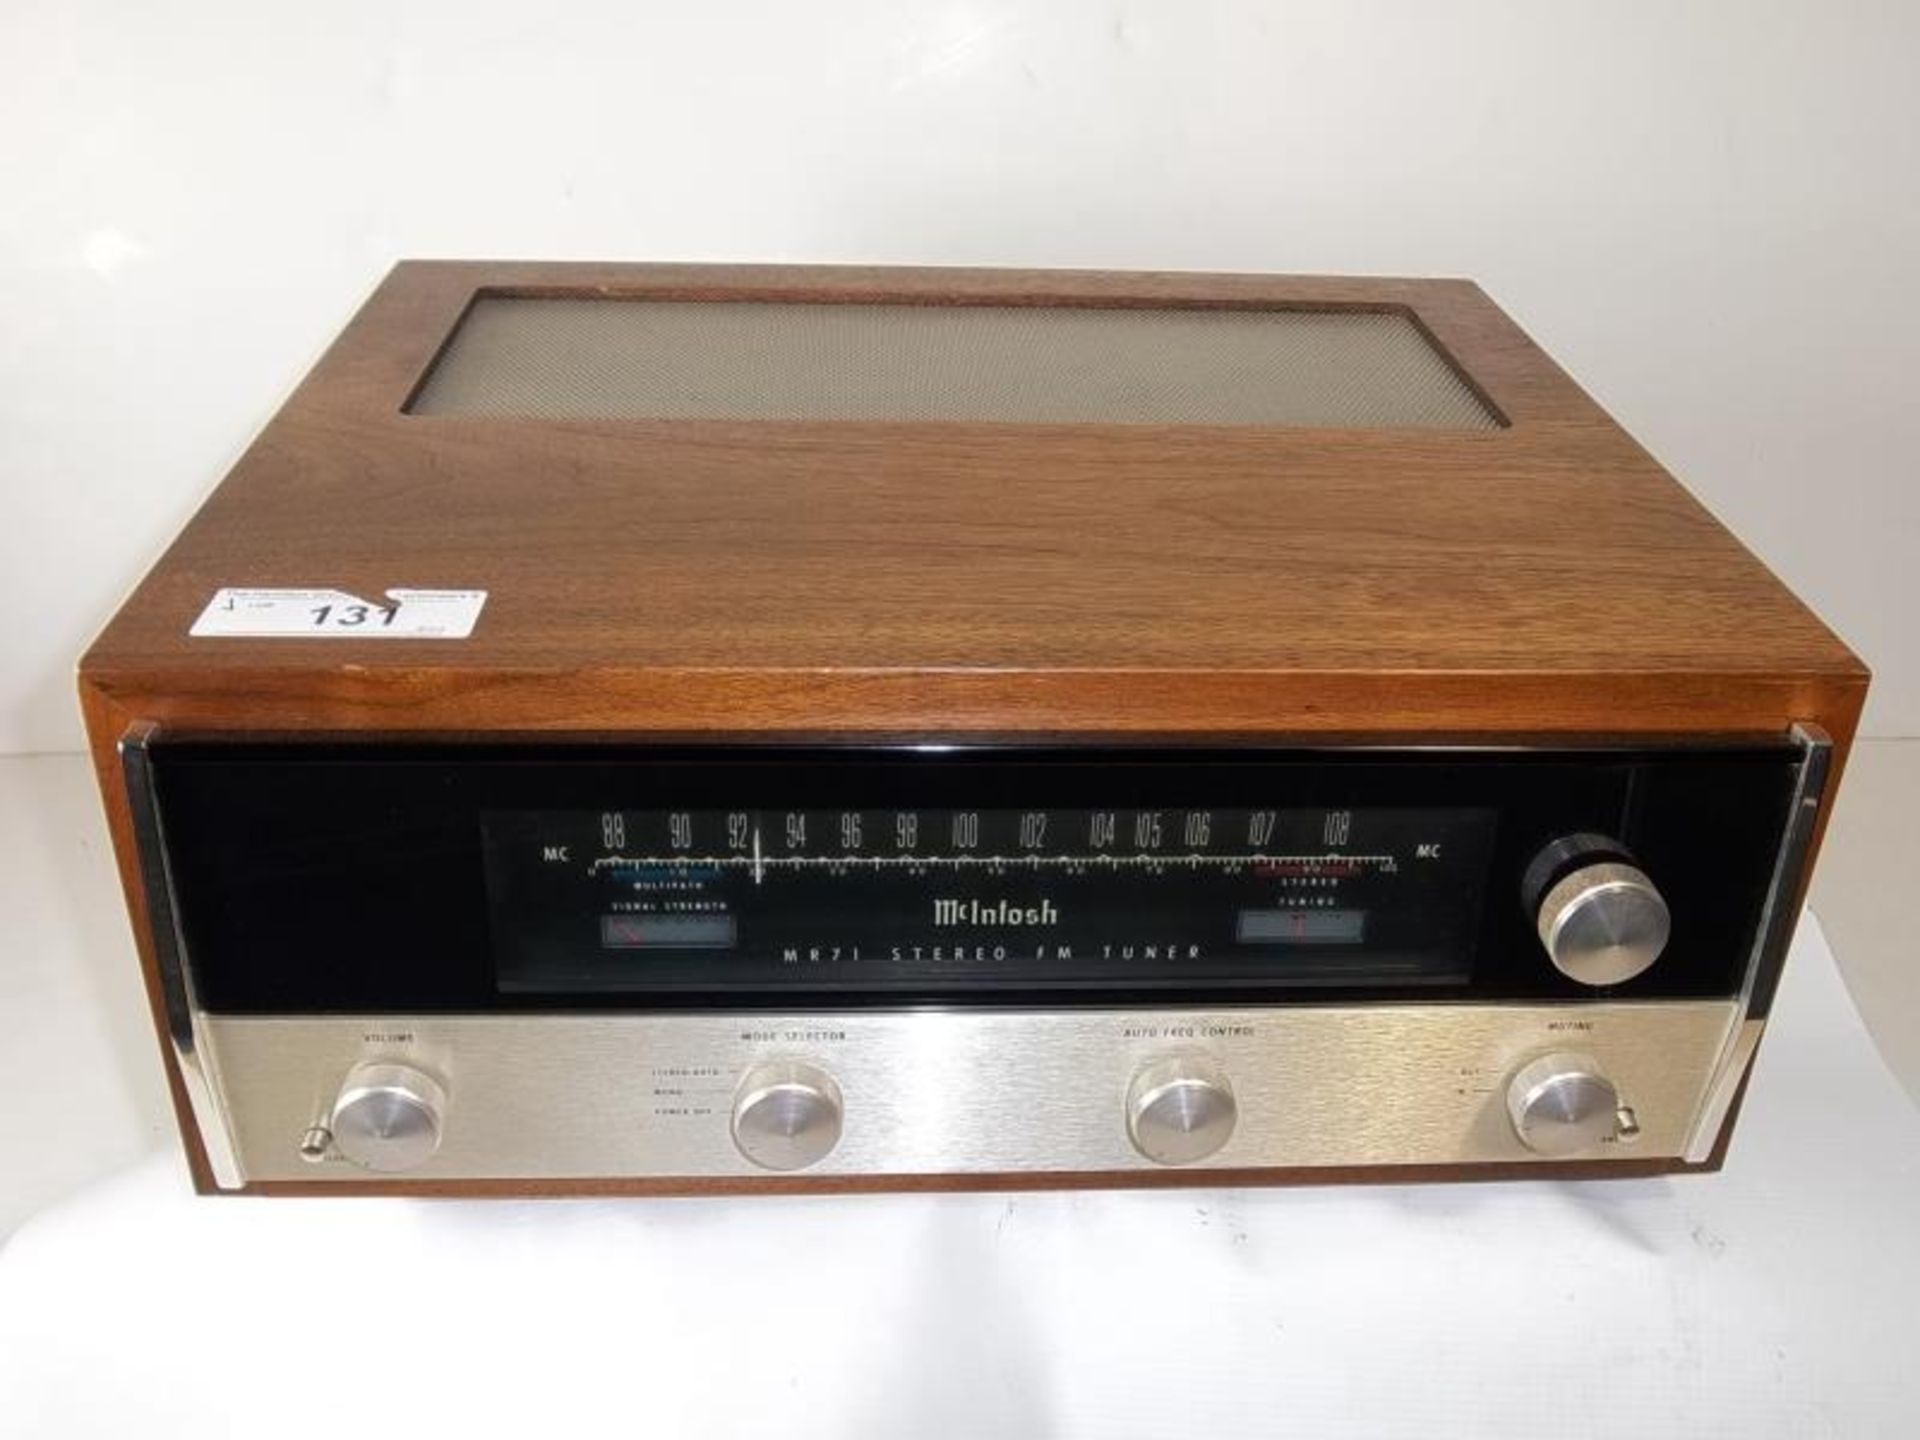 McIntosh MR-71 Stereo FM Tuner, wood case, s # 50B35, tested - powers up dimly